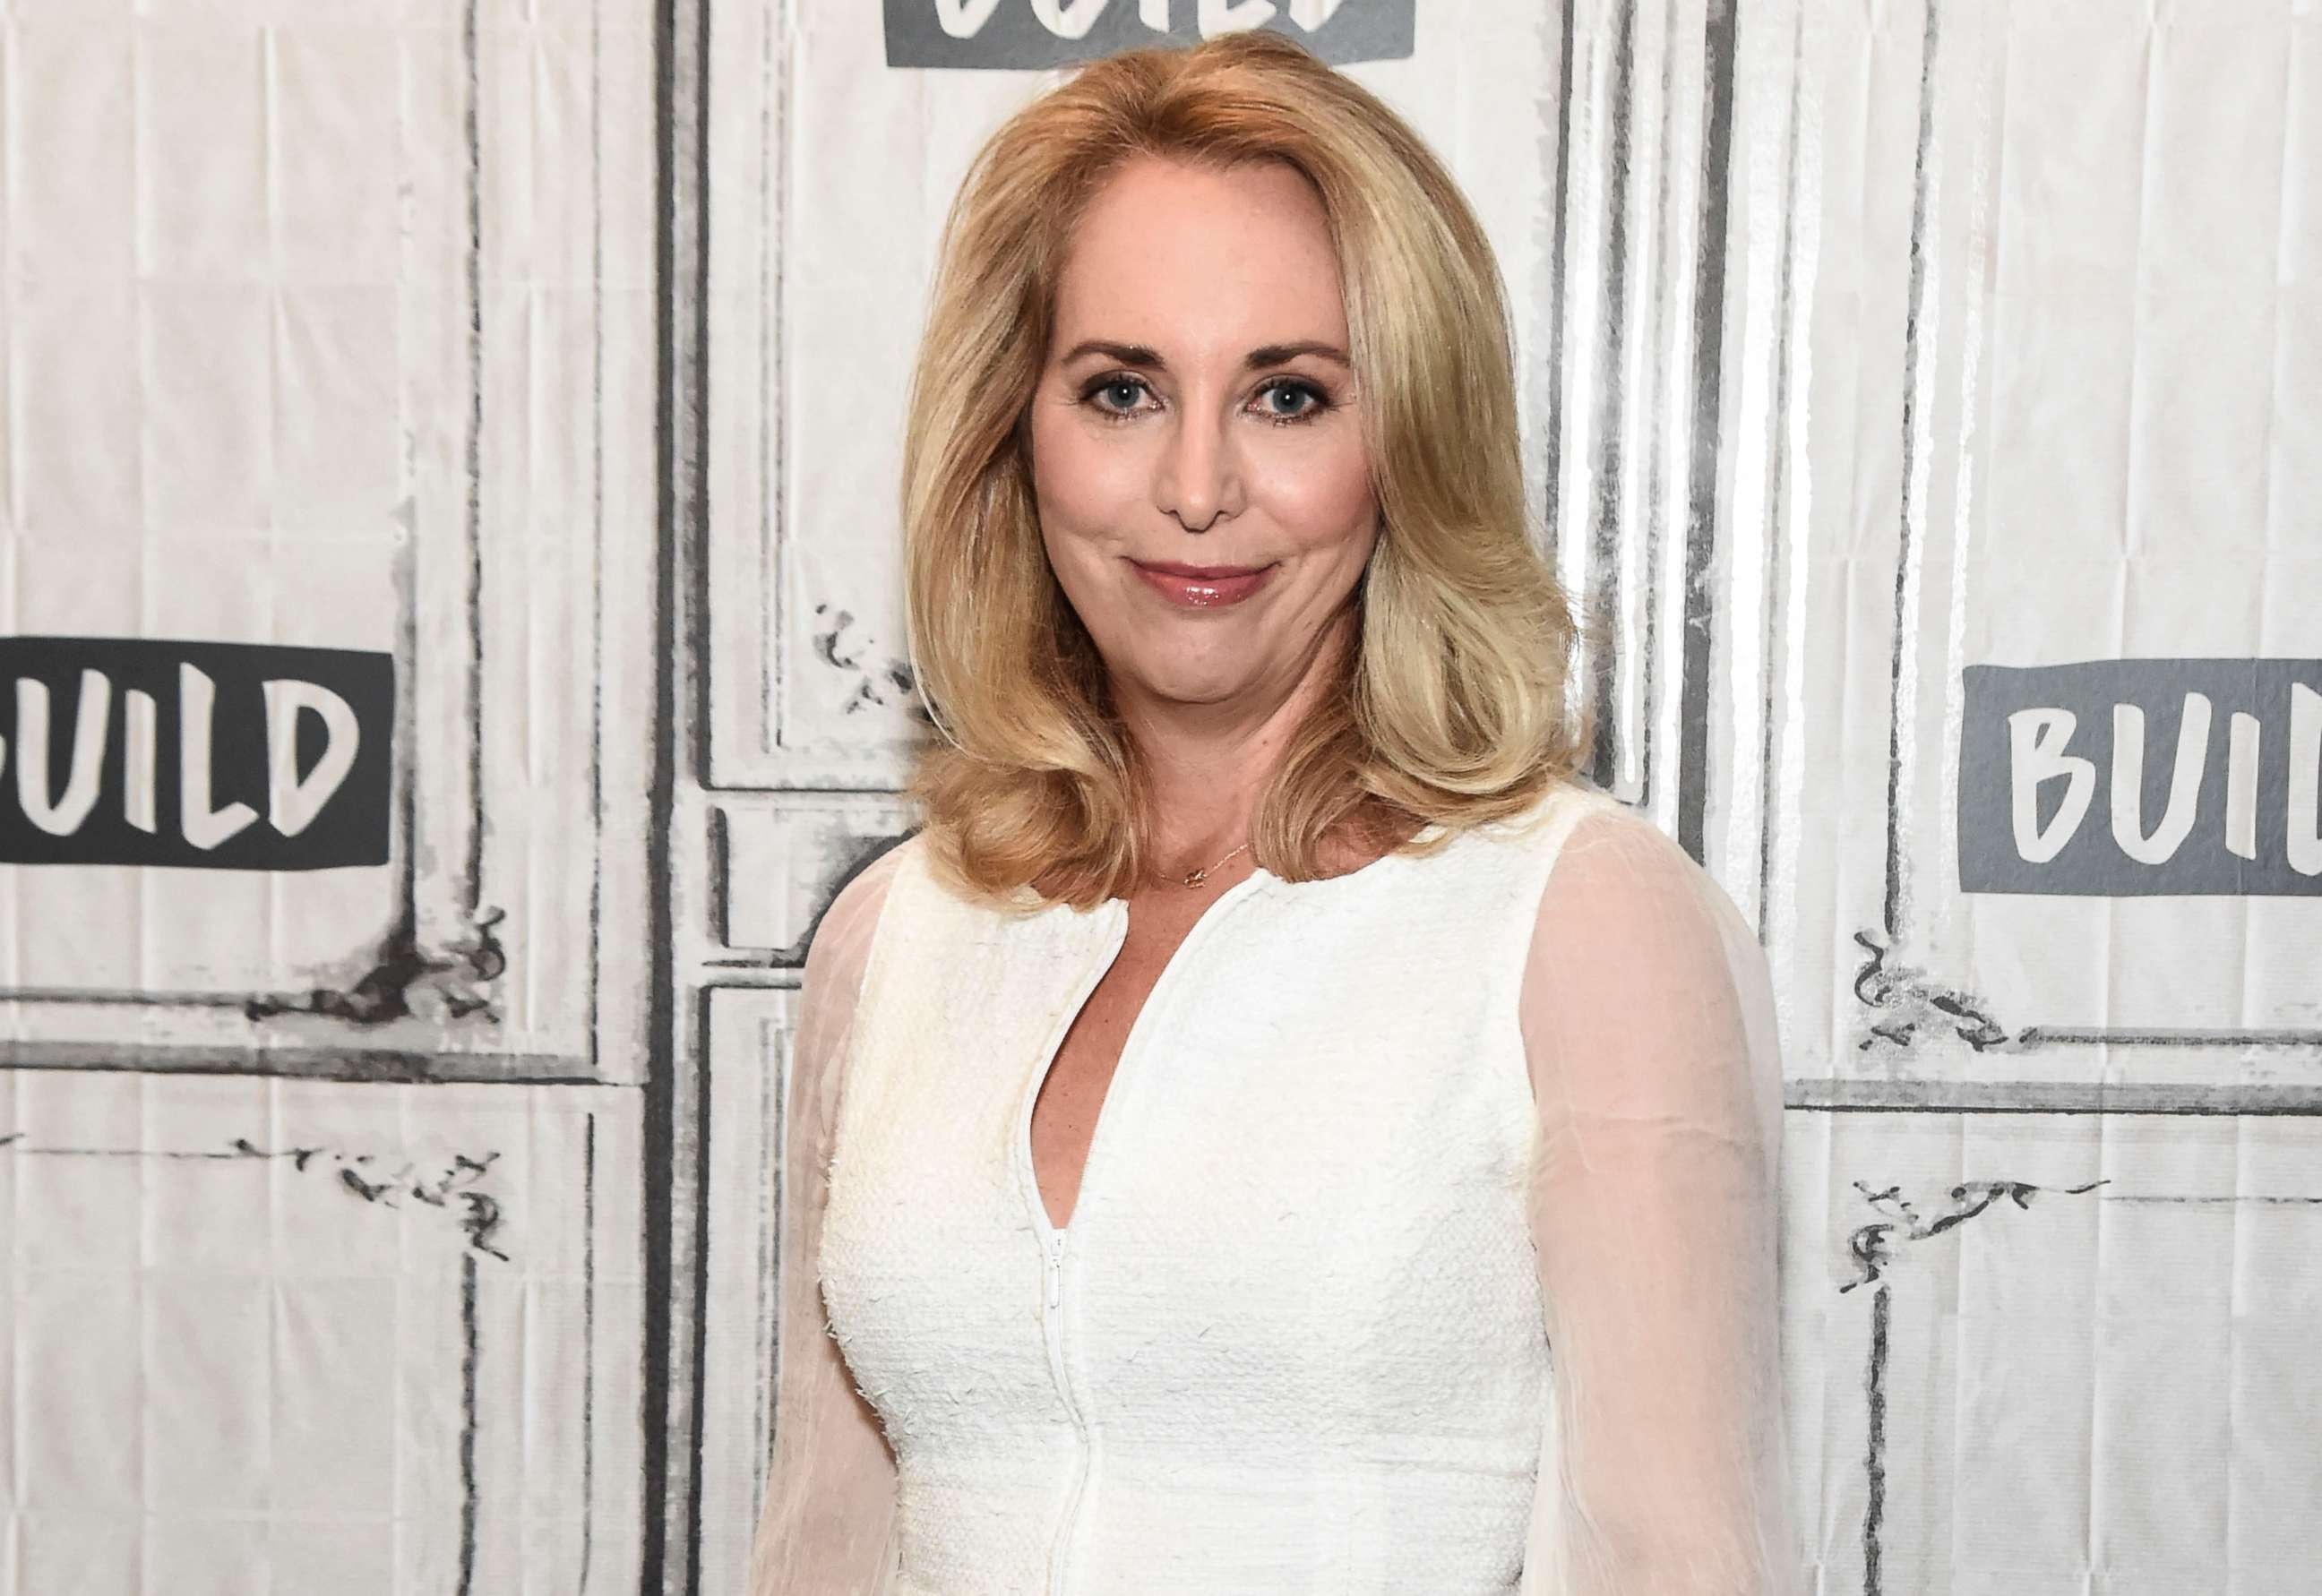 PHOTO: Valerie Plame attends the Build Series to discuss the film "Fair Game at Build Studio on Oct. 24, 2018, in New York City.